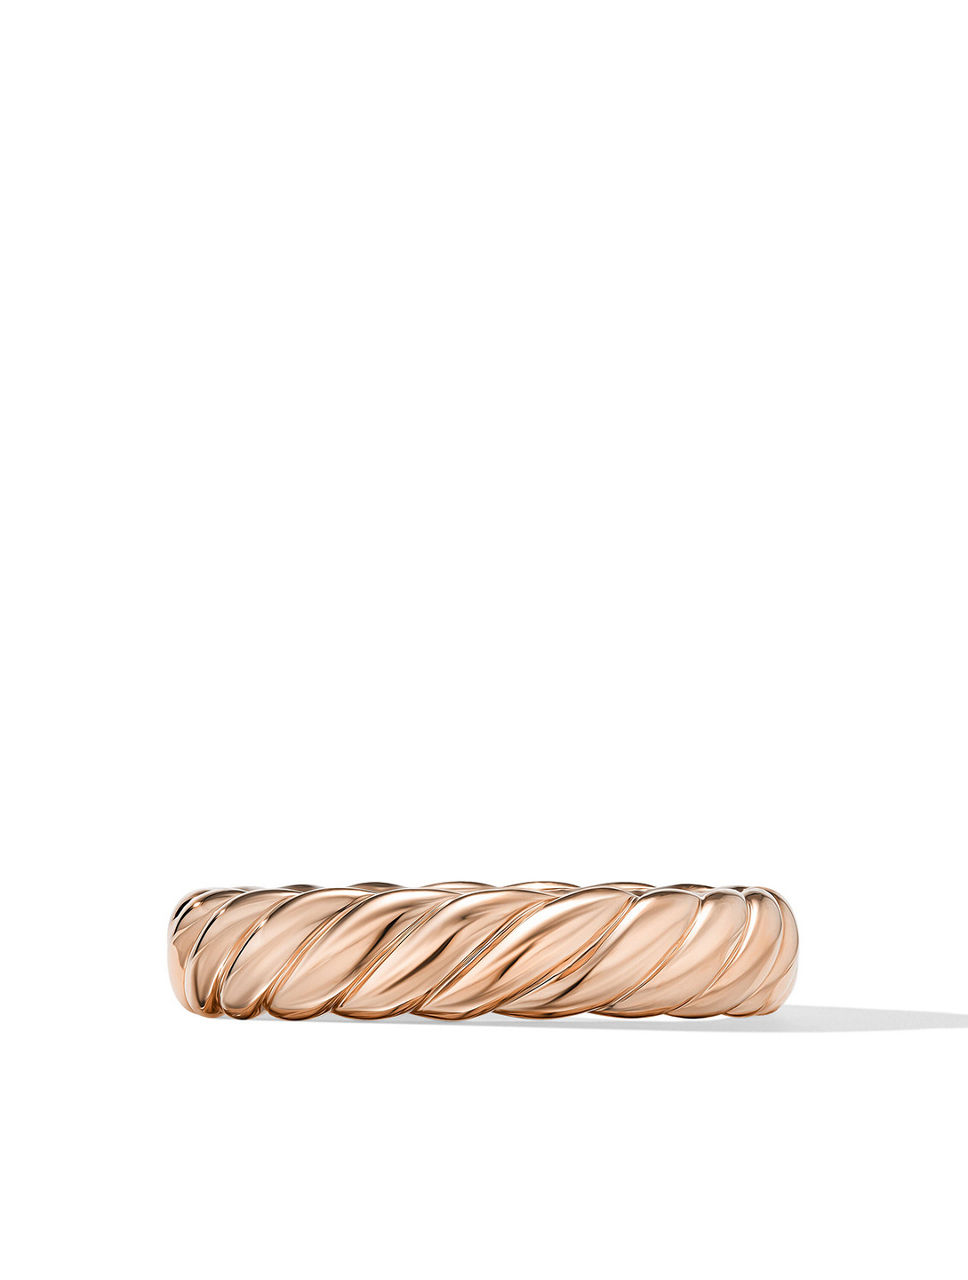 Sculpted Cable Band Ring 18k Rose Gold, 4.6mm